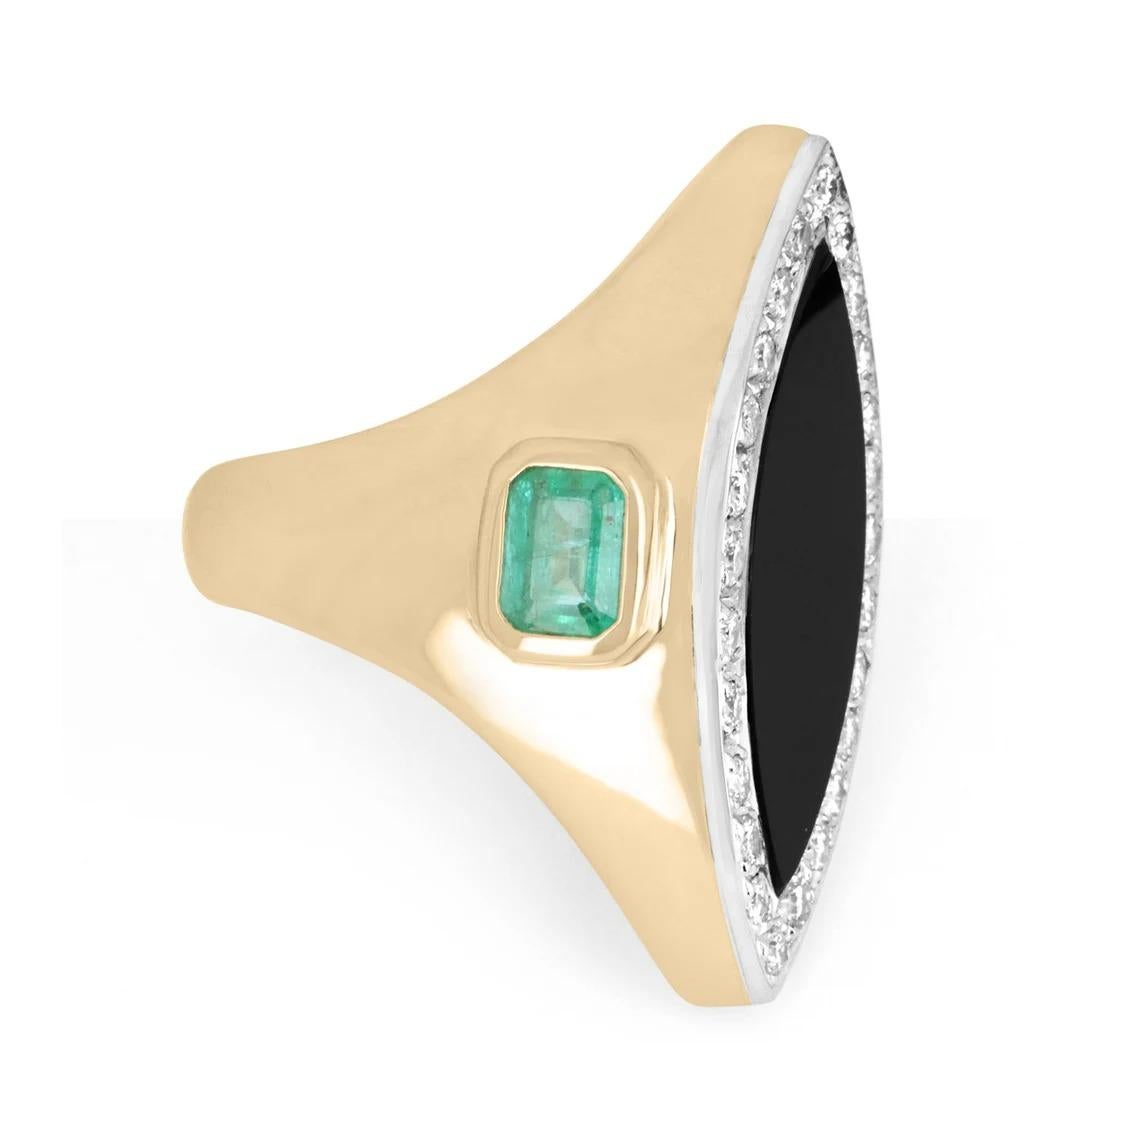 A large and swanky, multi-gemstone cocktail statement ring. The center stone features a 4-carat black onyx, cut in the shape of a marquise. Surrounding the center stone are 25 pave set, brilliant round-cut diamonds weighing half a carat total.